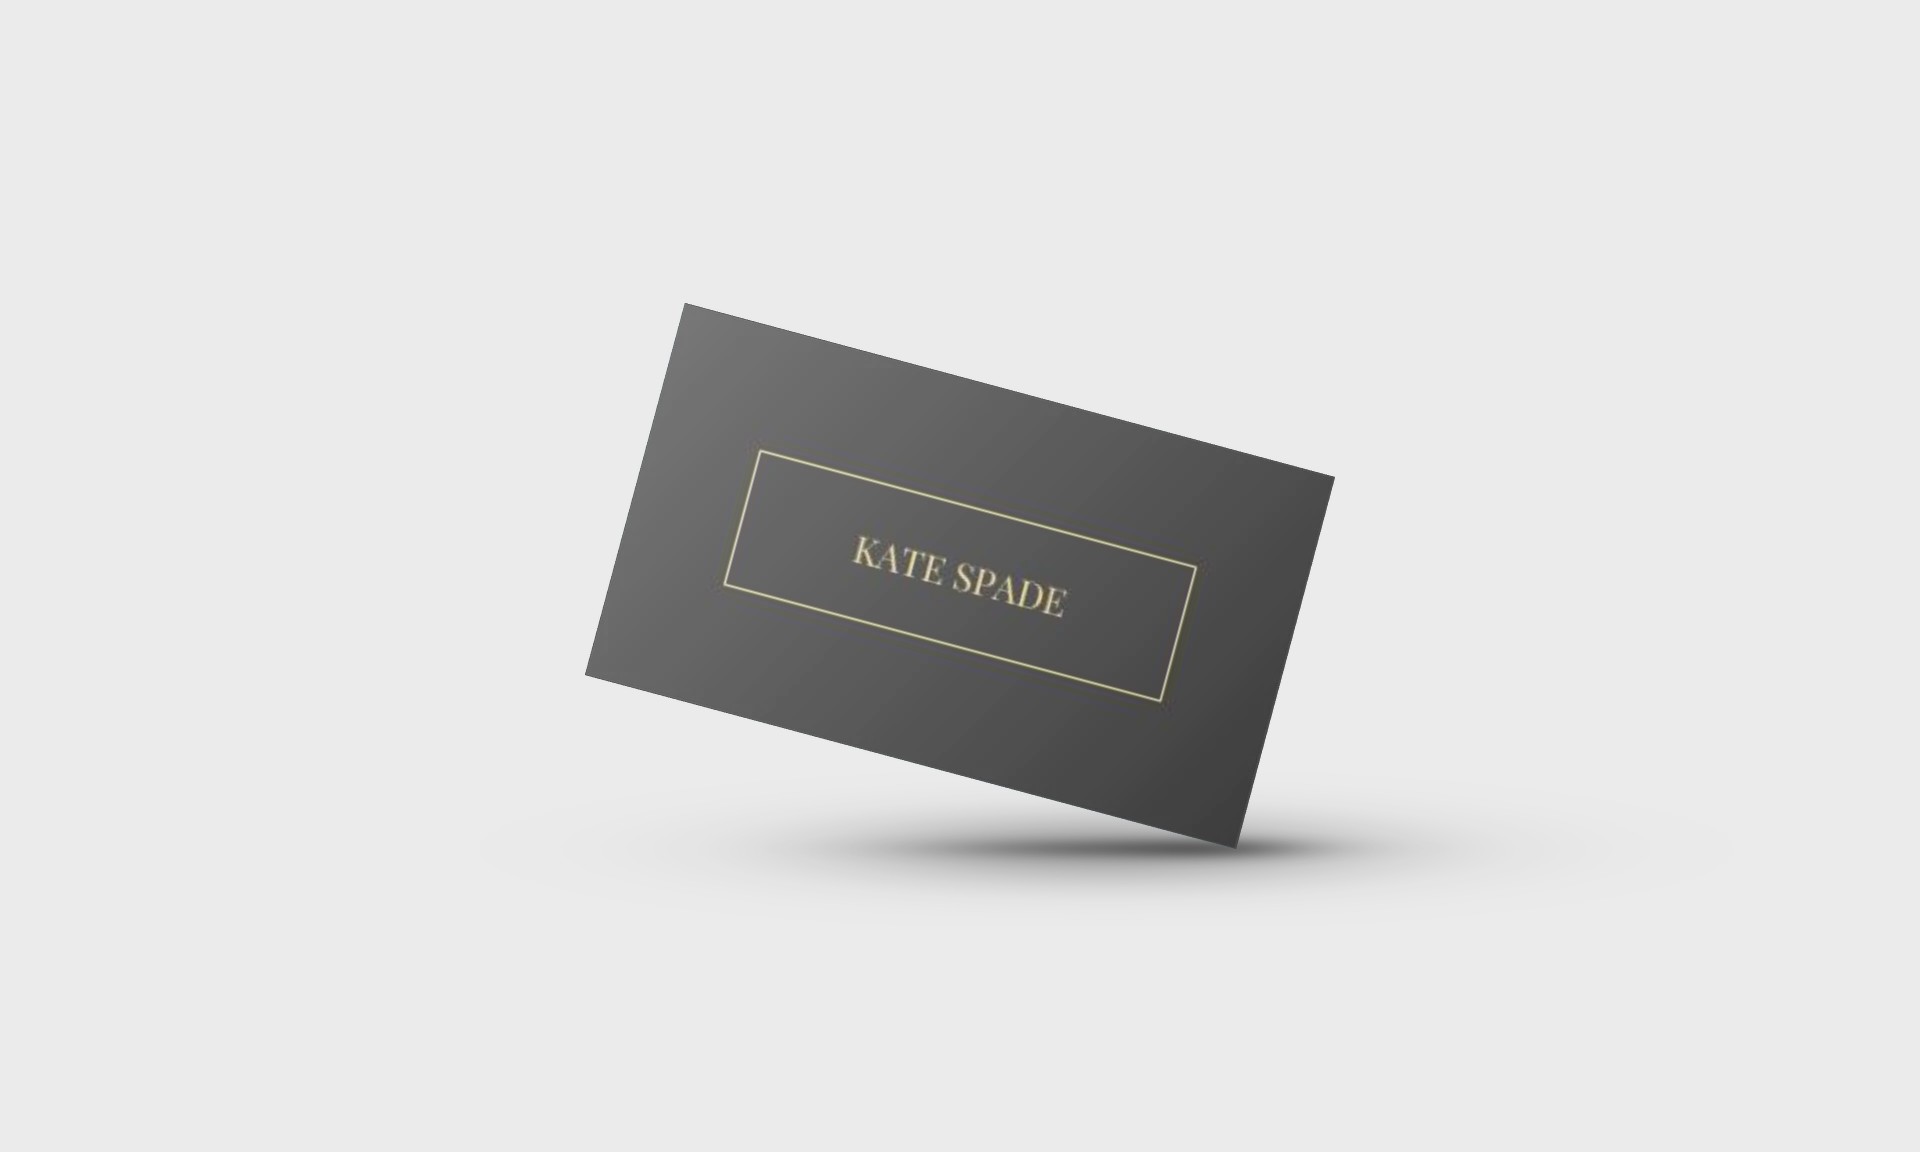 Kate Spade Business Card Template for Google DocsKate Spade Business Card TemplatKate Spade Business Card Template for Google Docse for Google Docs